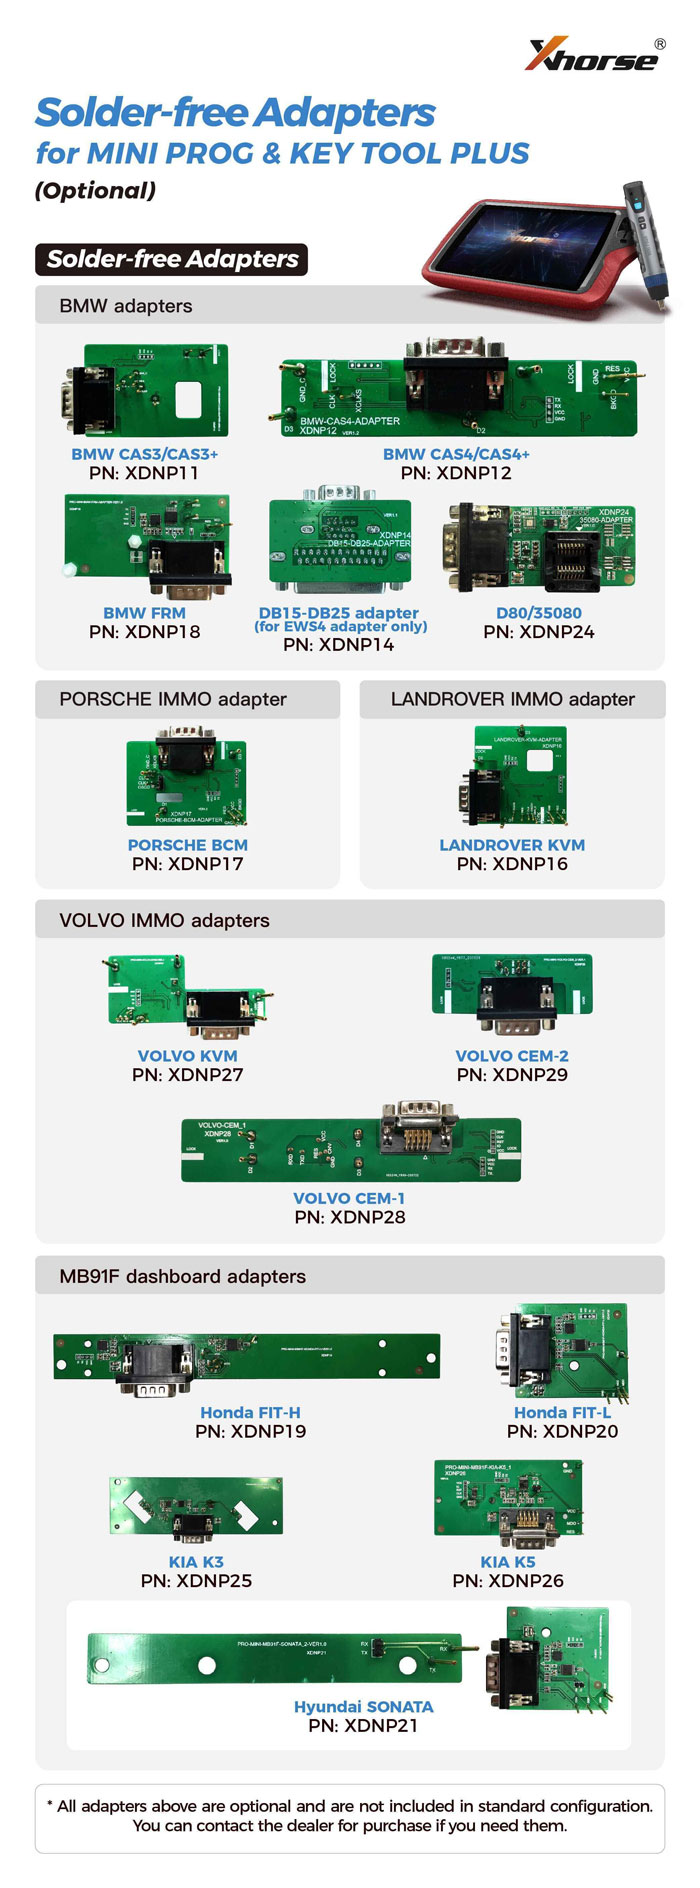 xhorse-solder-free-adapters